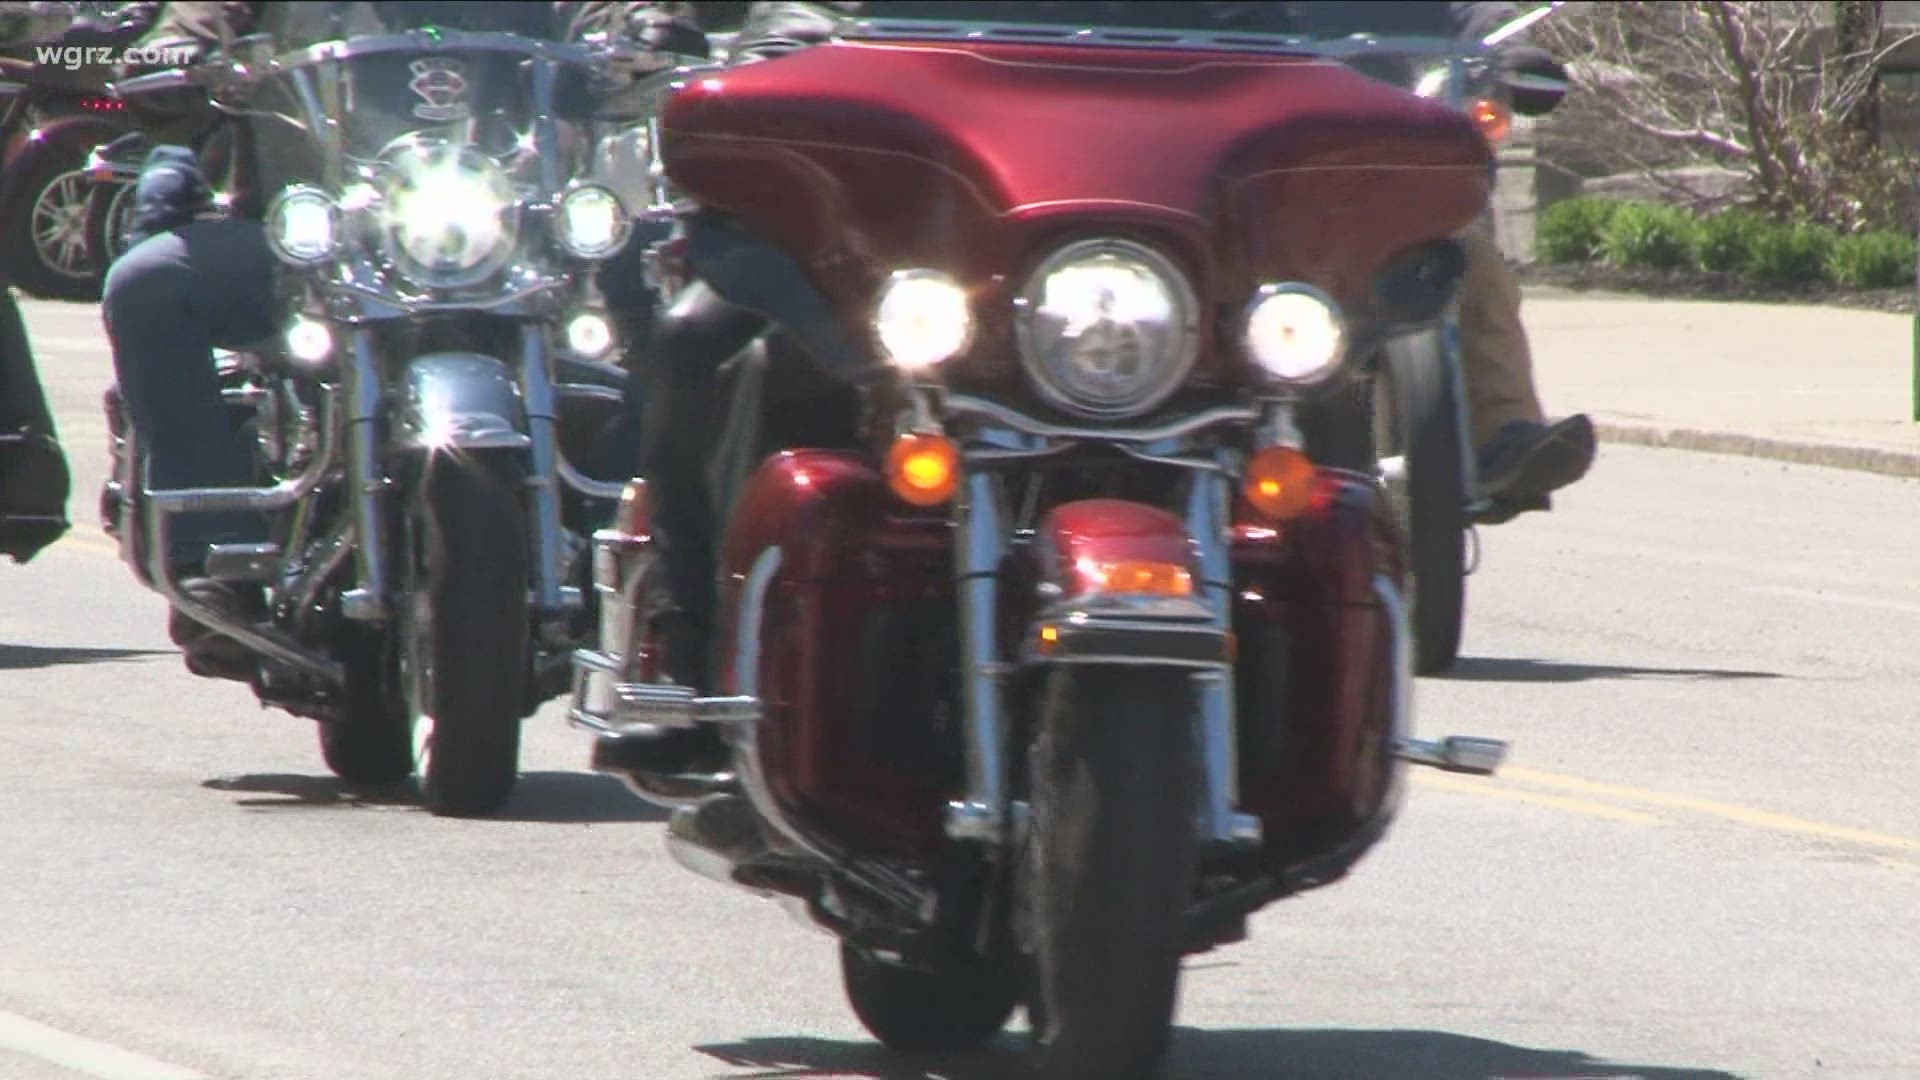 The American Bikers Aimed Toward Education event aims to remind all drivers that motorcyclists are back on the road.